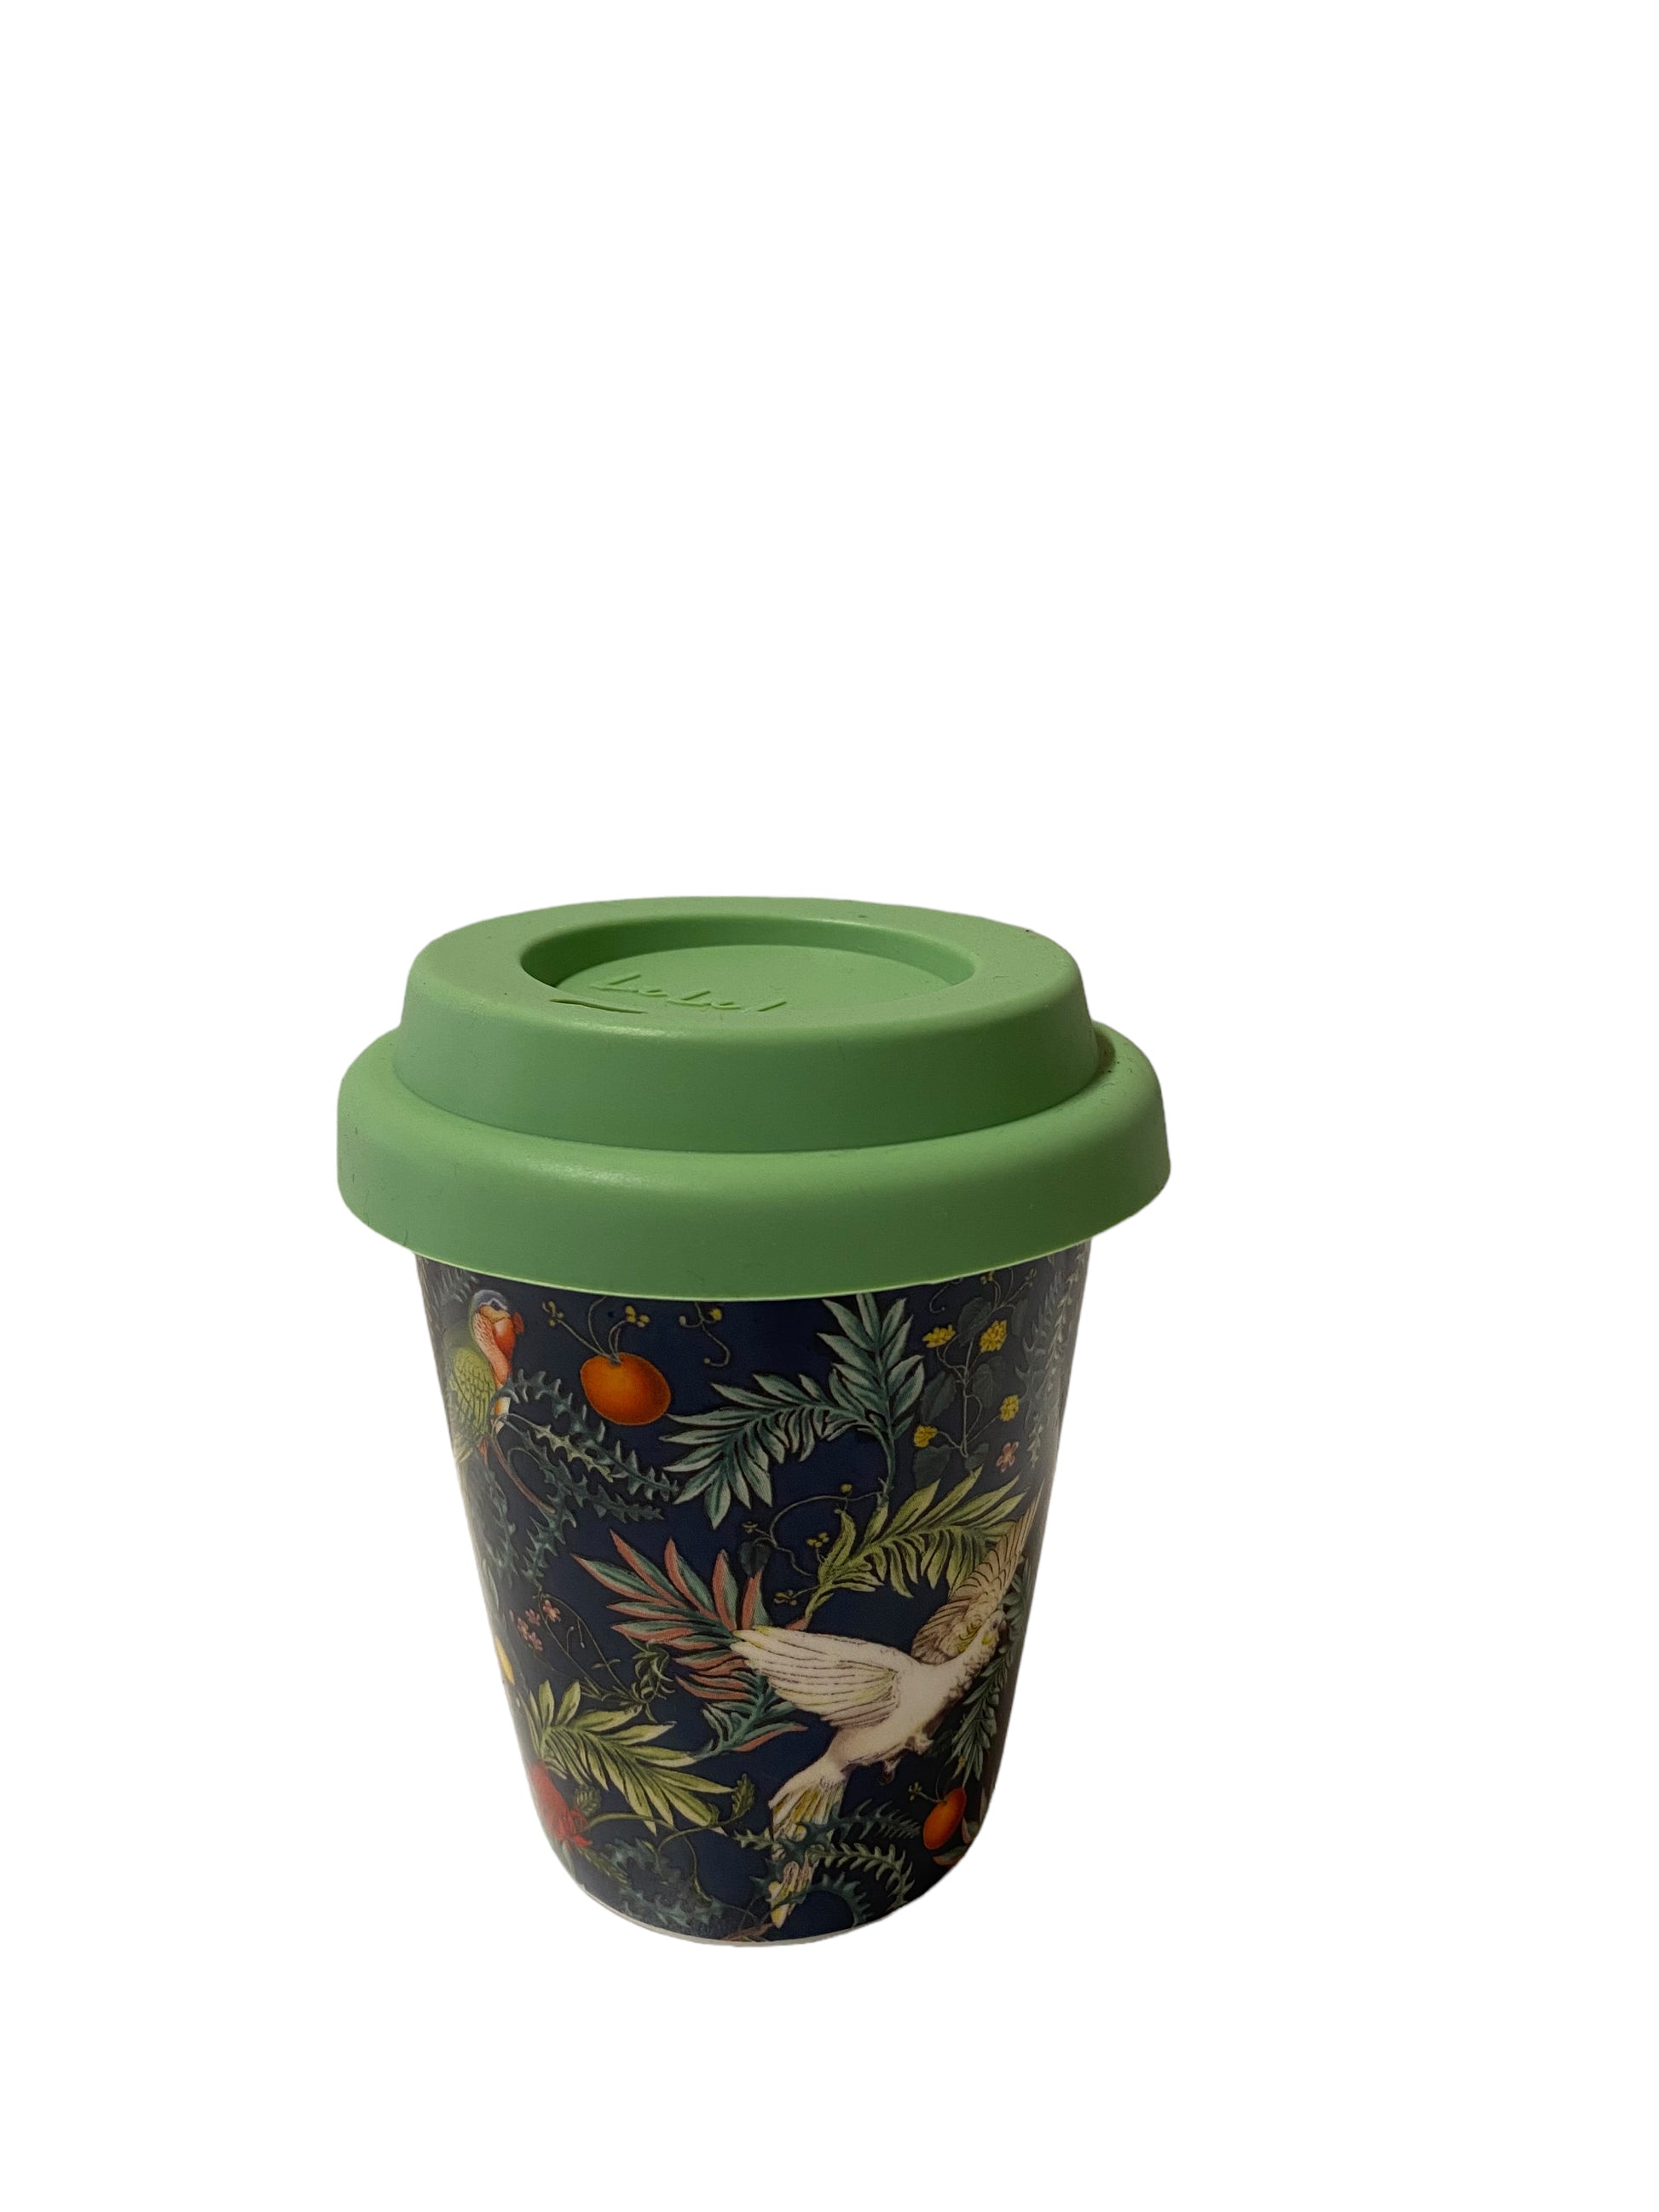 Cup Coffee Mug Parrot Cockatoo Bird - The Renmy Store Homewares & Gifts 